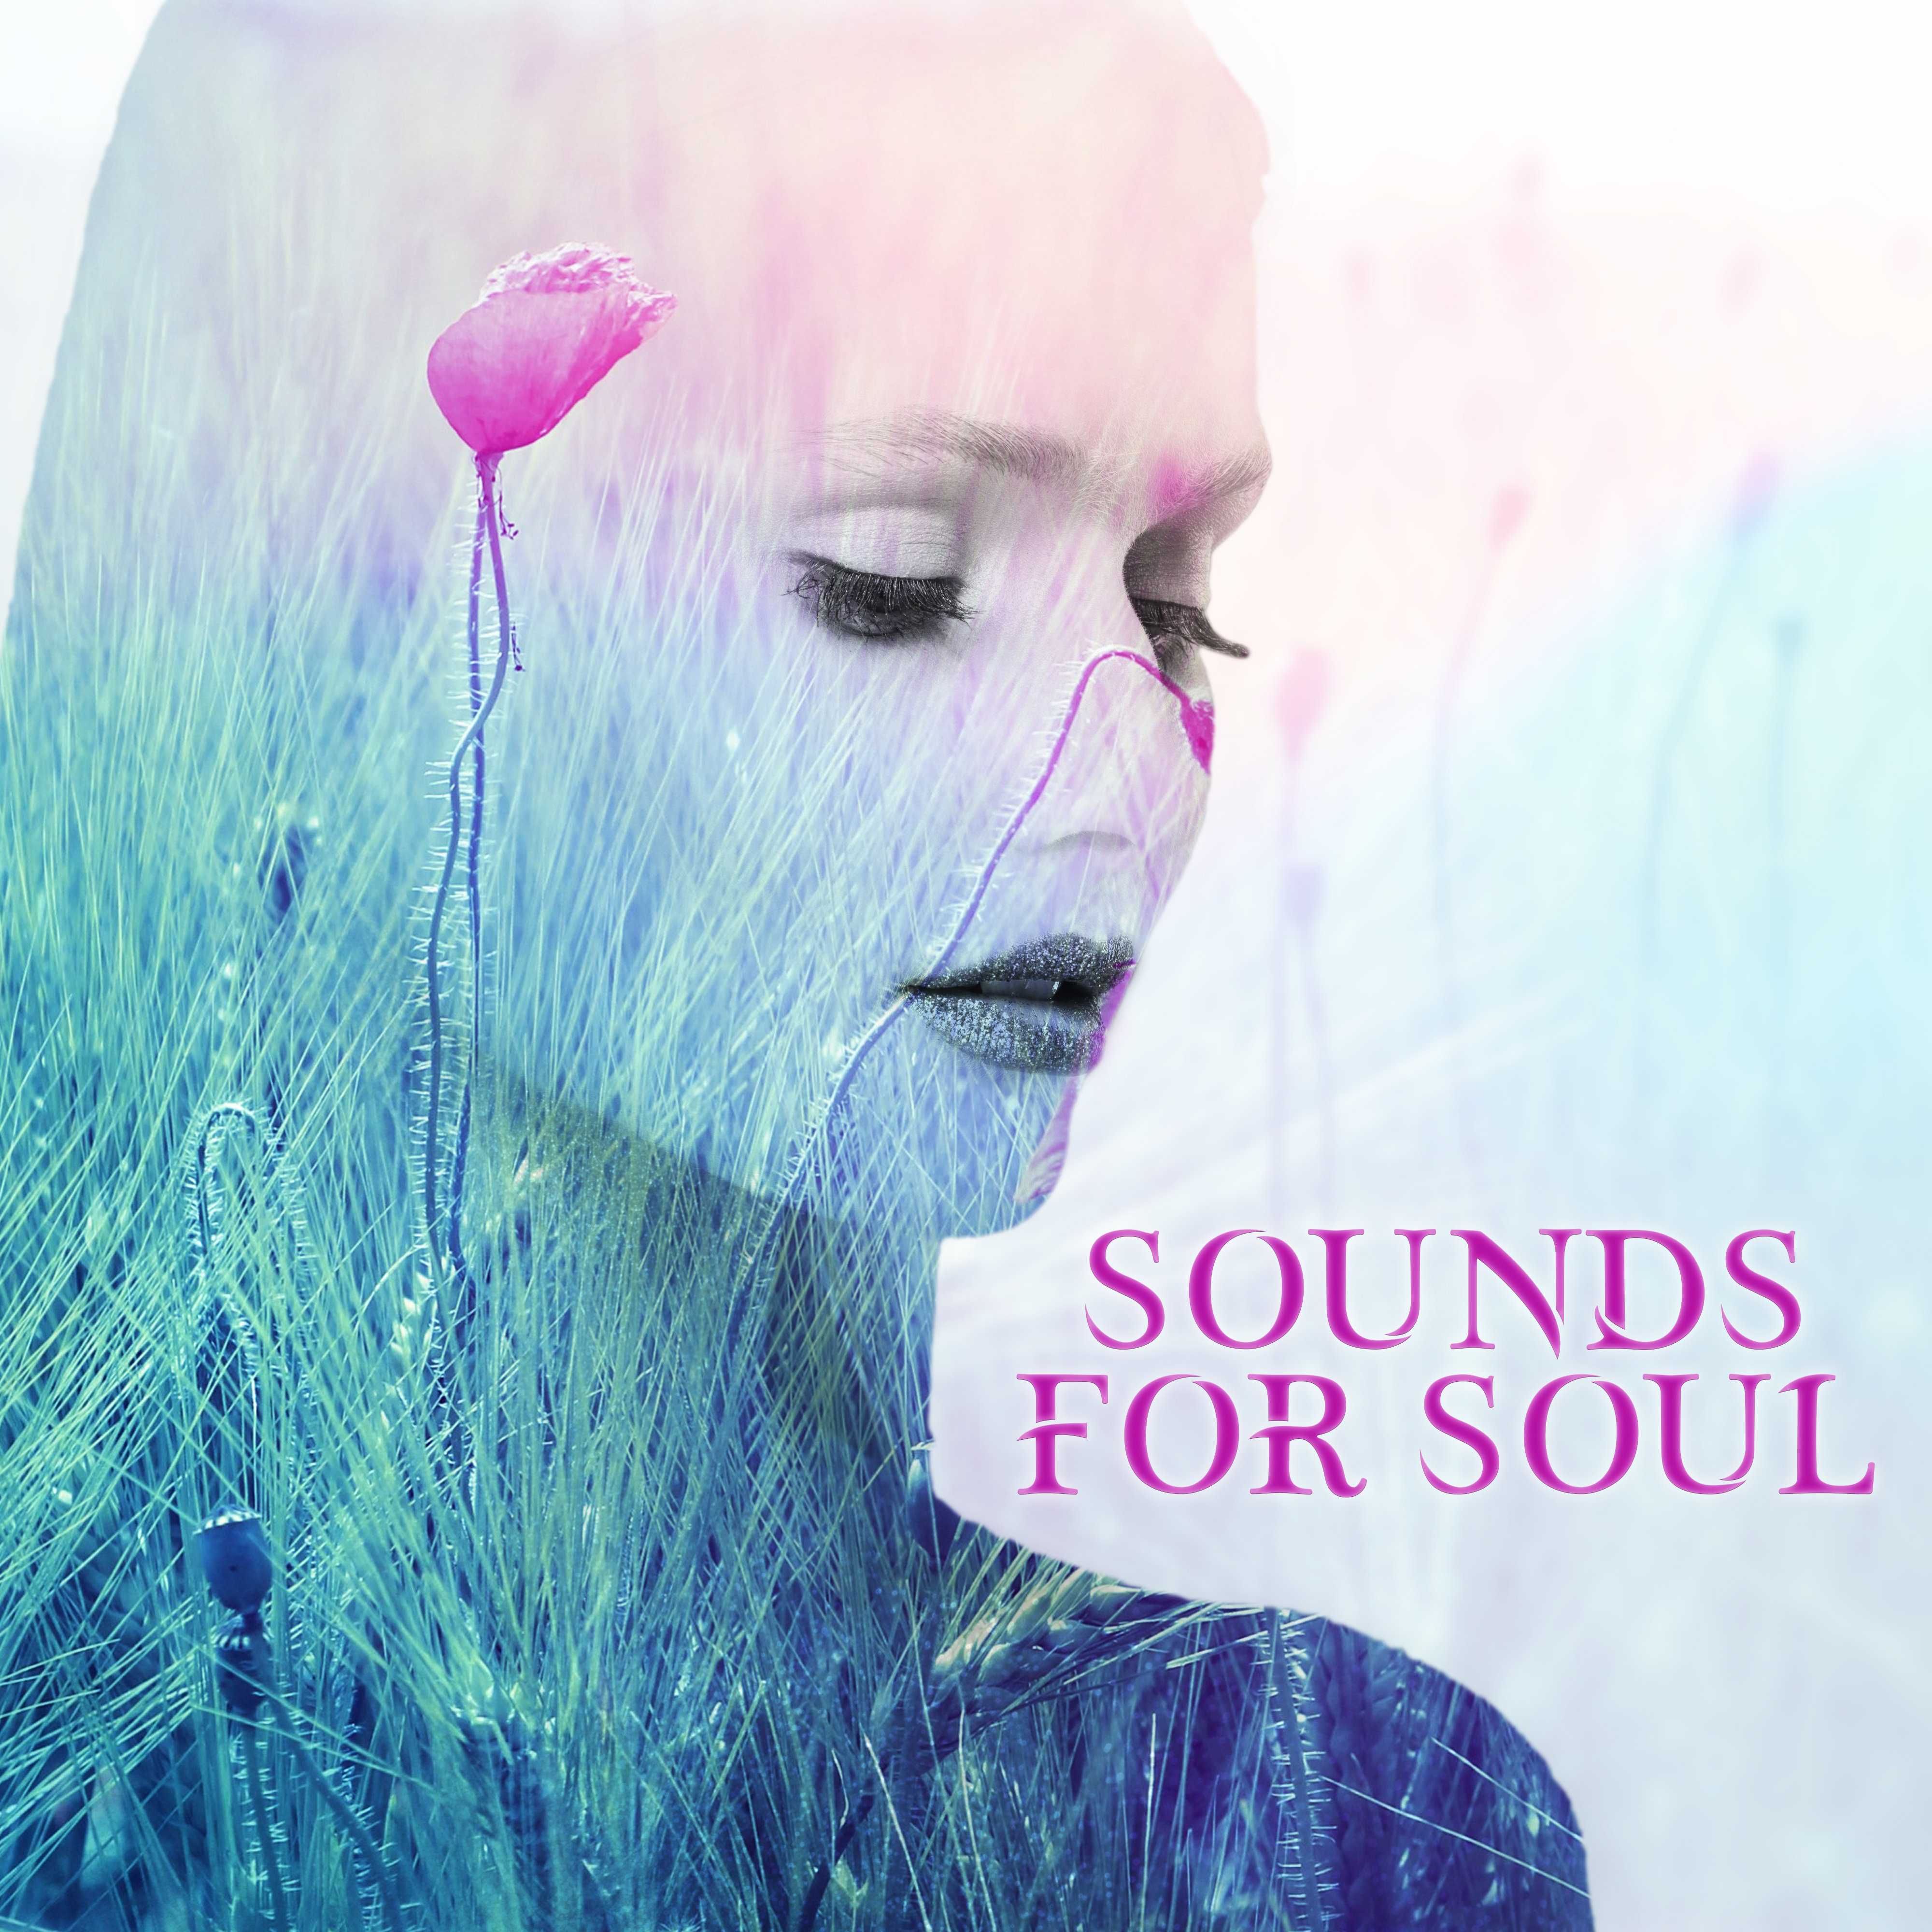 Sounds for Soul – Meditation Music, Hatha Yoga, Zen Spirit, Shades of Chakra, Peaceful Music to Relax